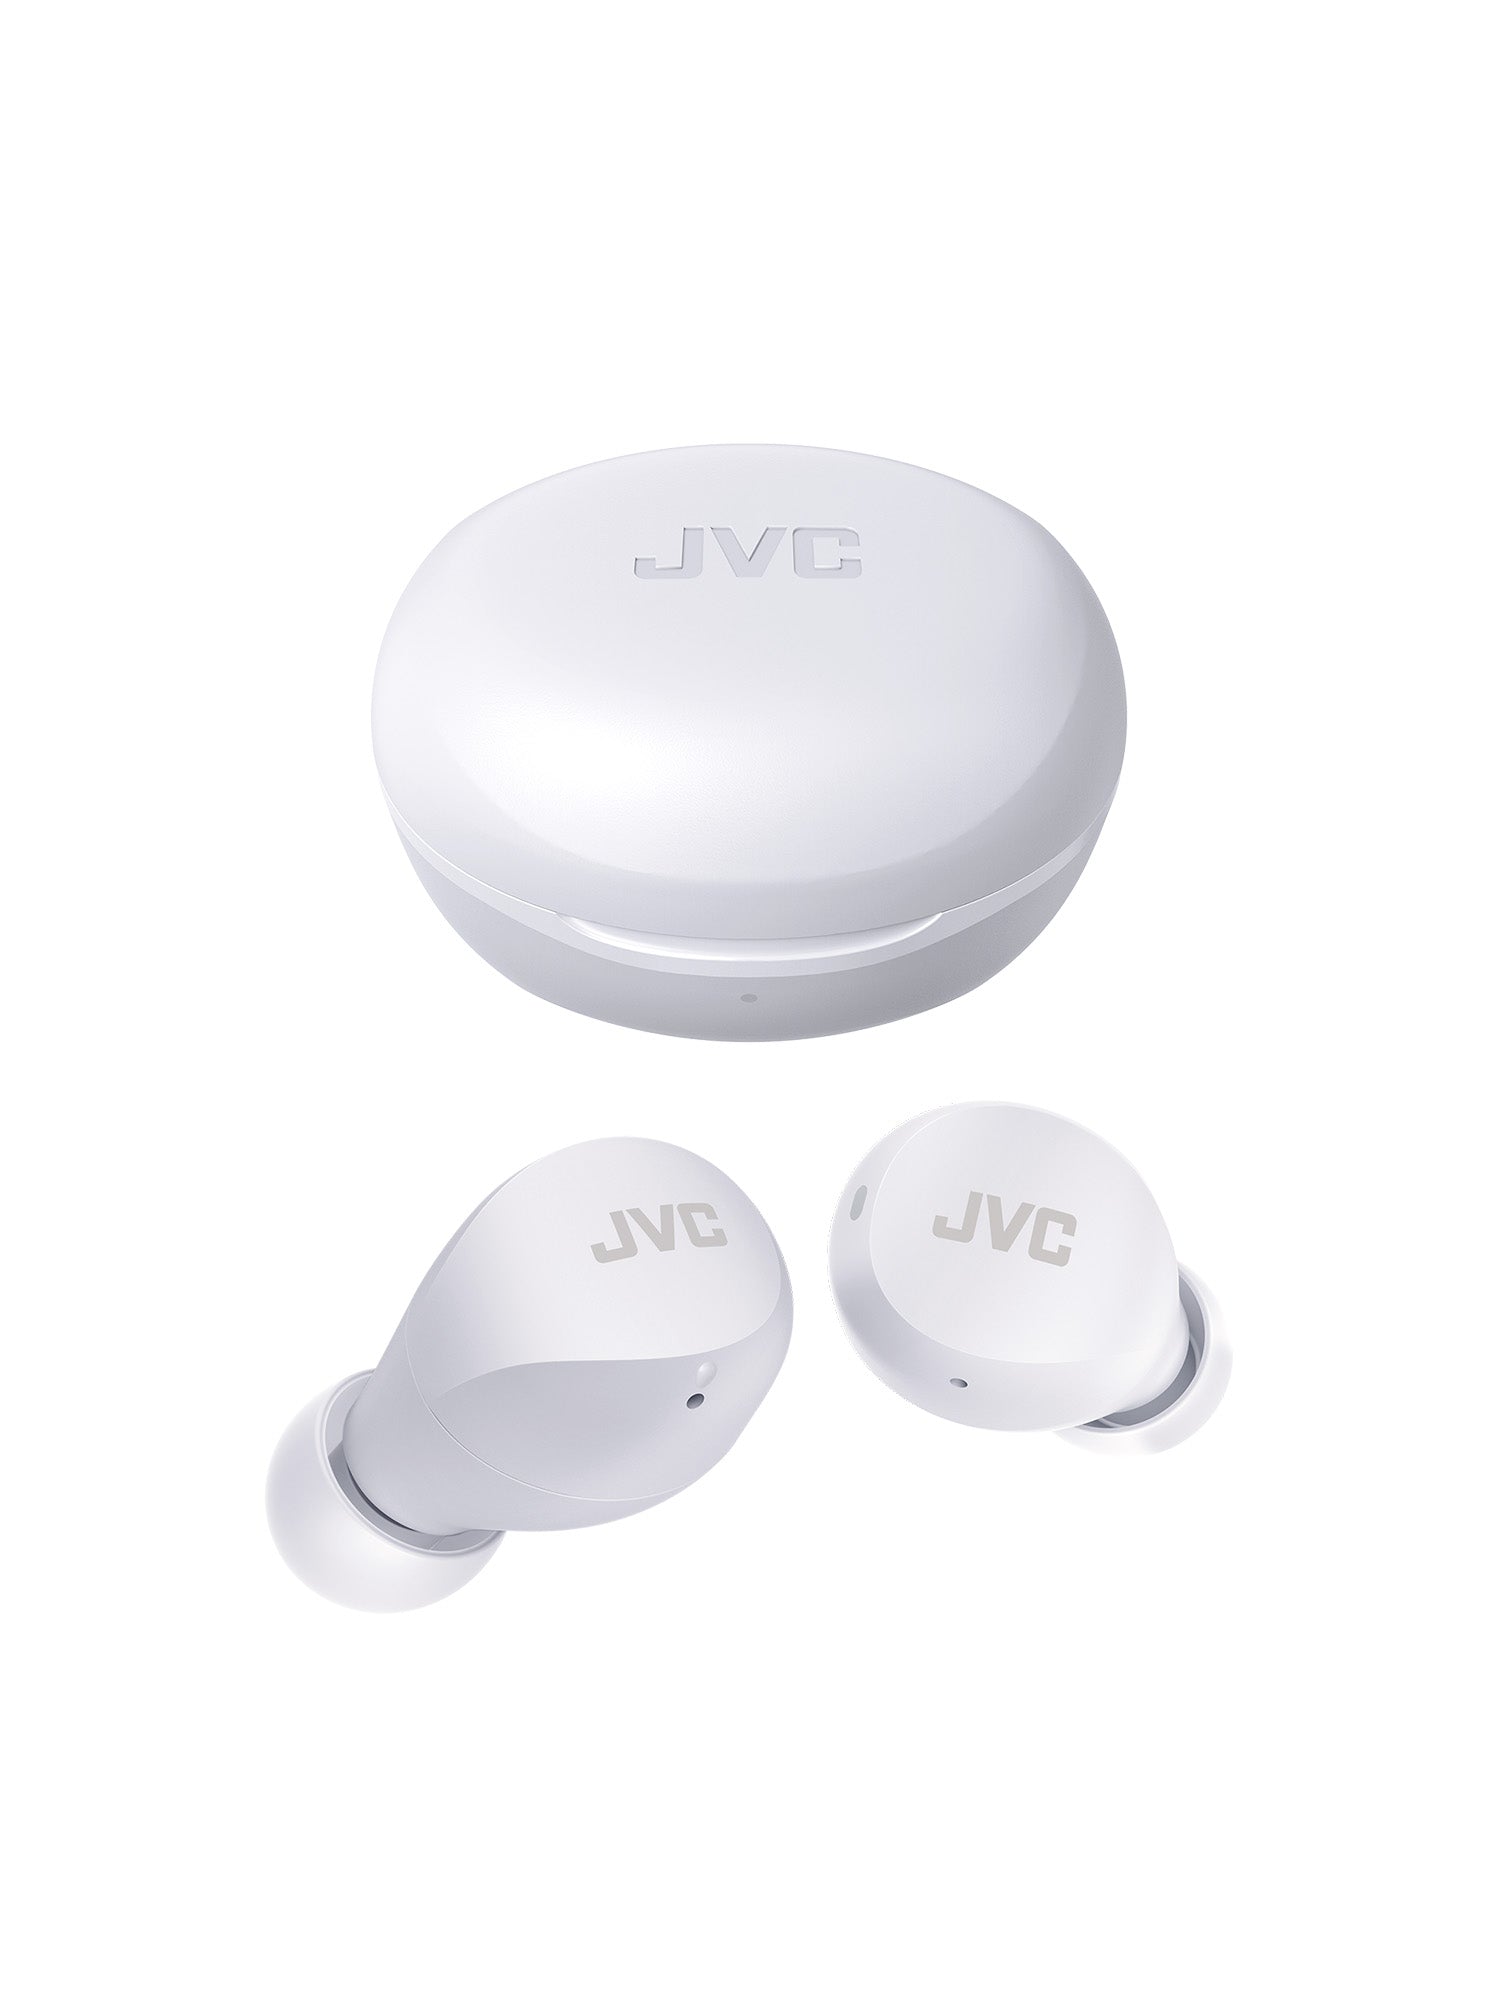 HA-A6T-W in White Gumy mini wireless earbuds &amp; charger by JVC